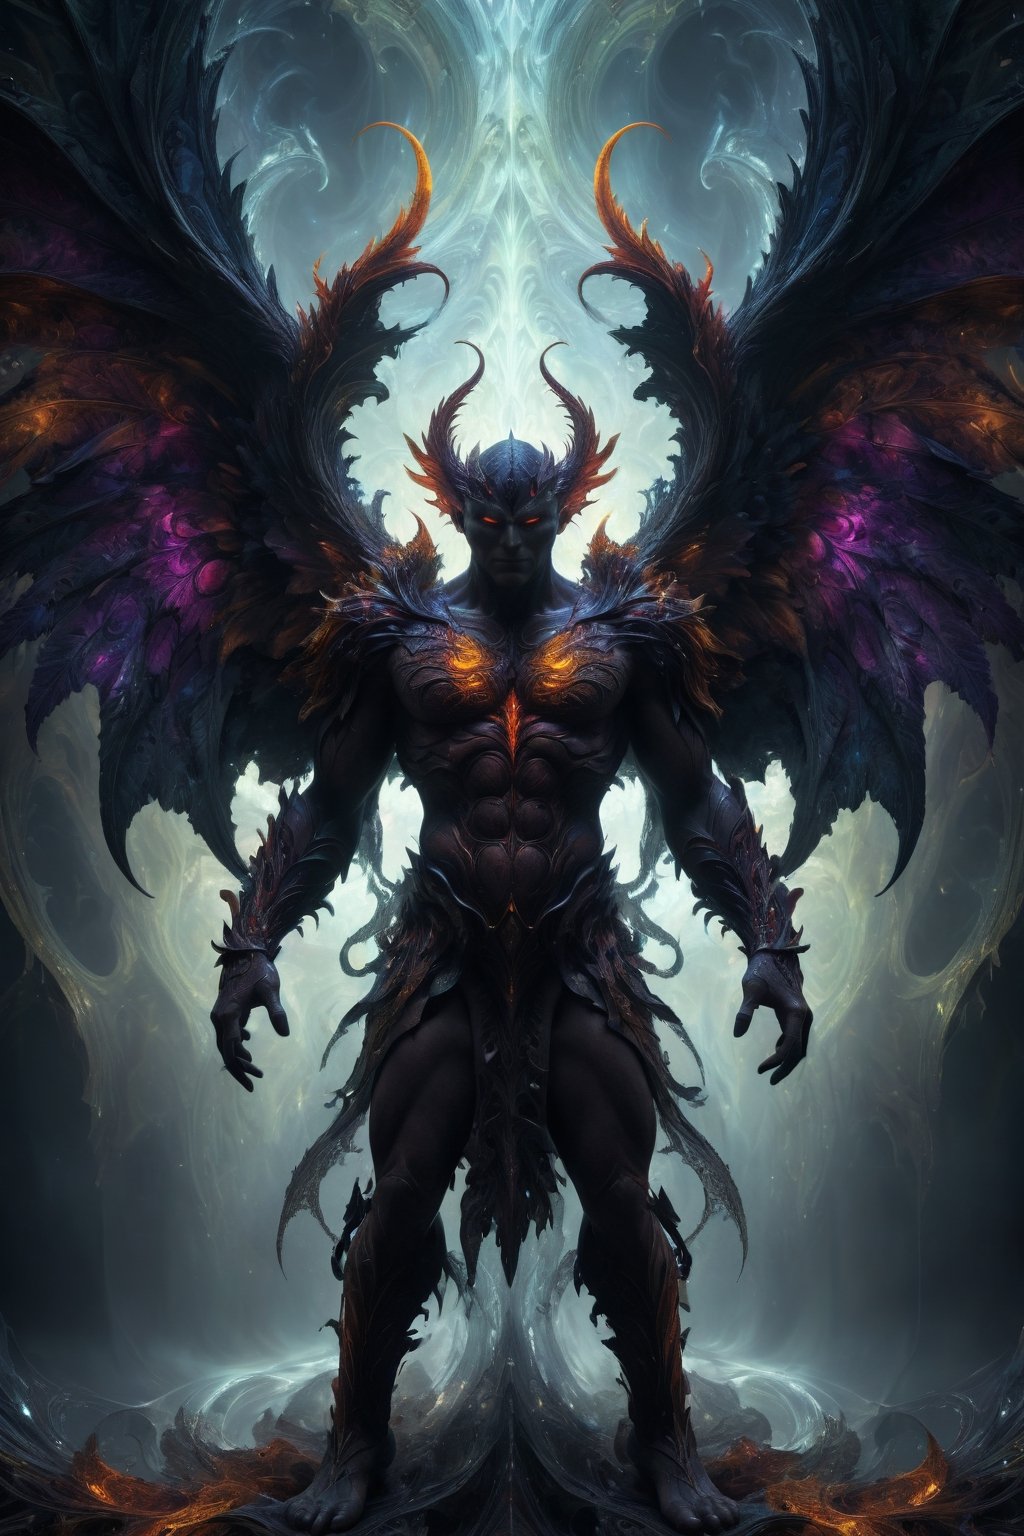 This image shows a man in the form of a demon with angel wings standing full body and with a sinister and obscure background in an abstract 3D fractal style. The demon looks realistic, with intricate details and vibrant colors bringing him to life. The composition of the image is captivating, with the man seemingly emerging from a chaotic and mesmerizing fractal pattern. The 3D fractal style gives the image a unique and surreal feel, making it stand out from other images. The lighting and framing of the image further enhance its beauty, creating a stunning ominous and dark look for viewers to enjoy.